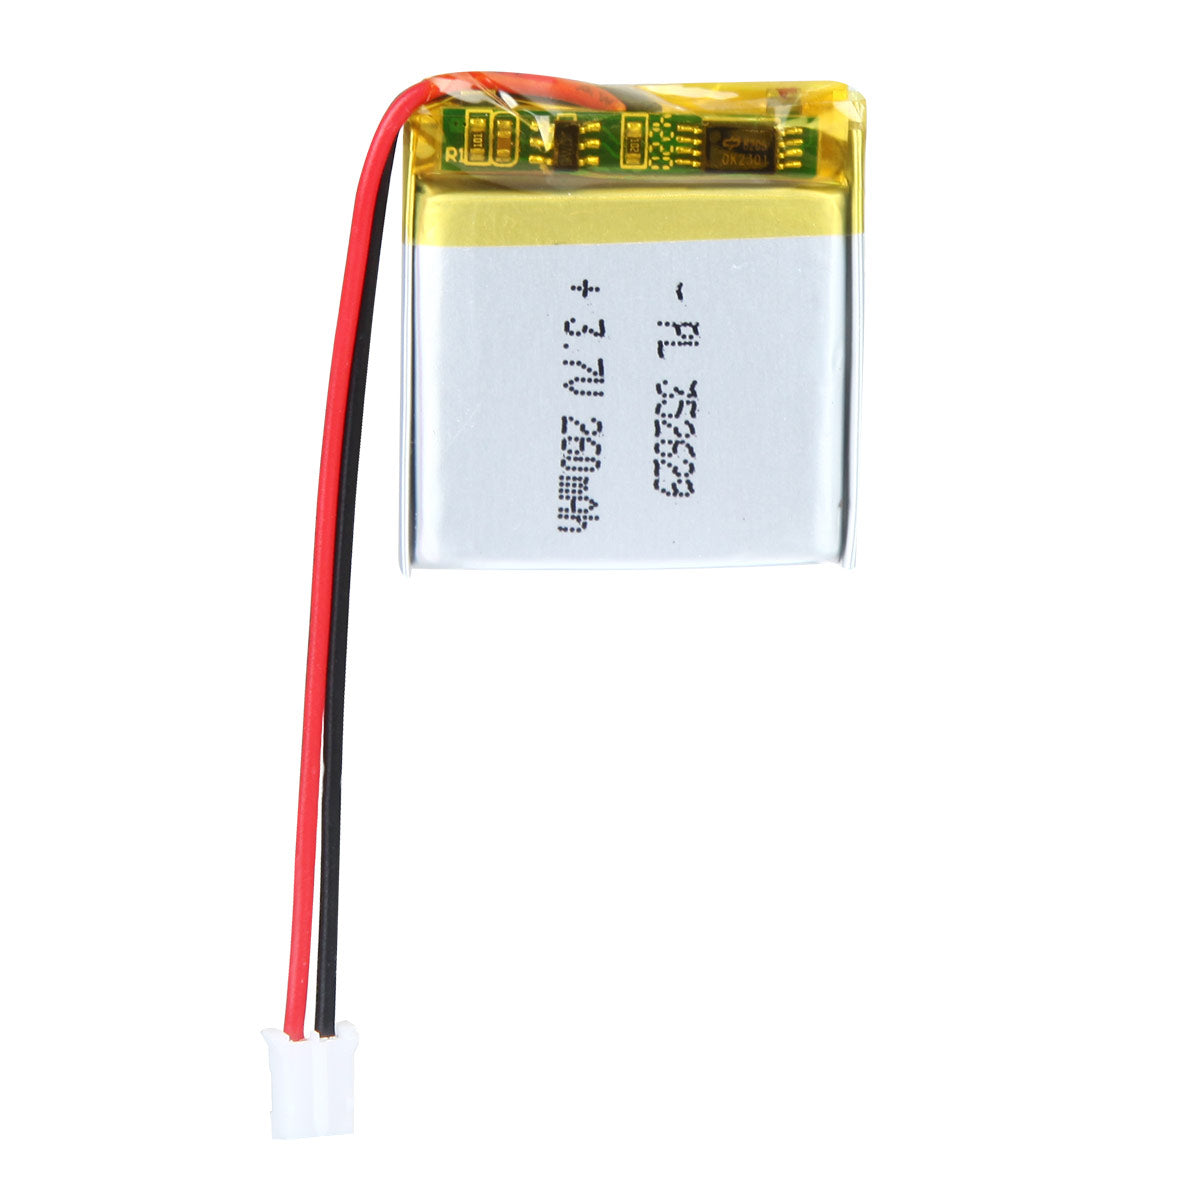 YDL 3.7V 260mAh 352629 Rechargeable Lipo Battery with JST Connector - YDL Battery